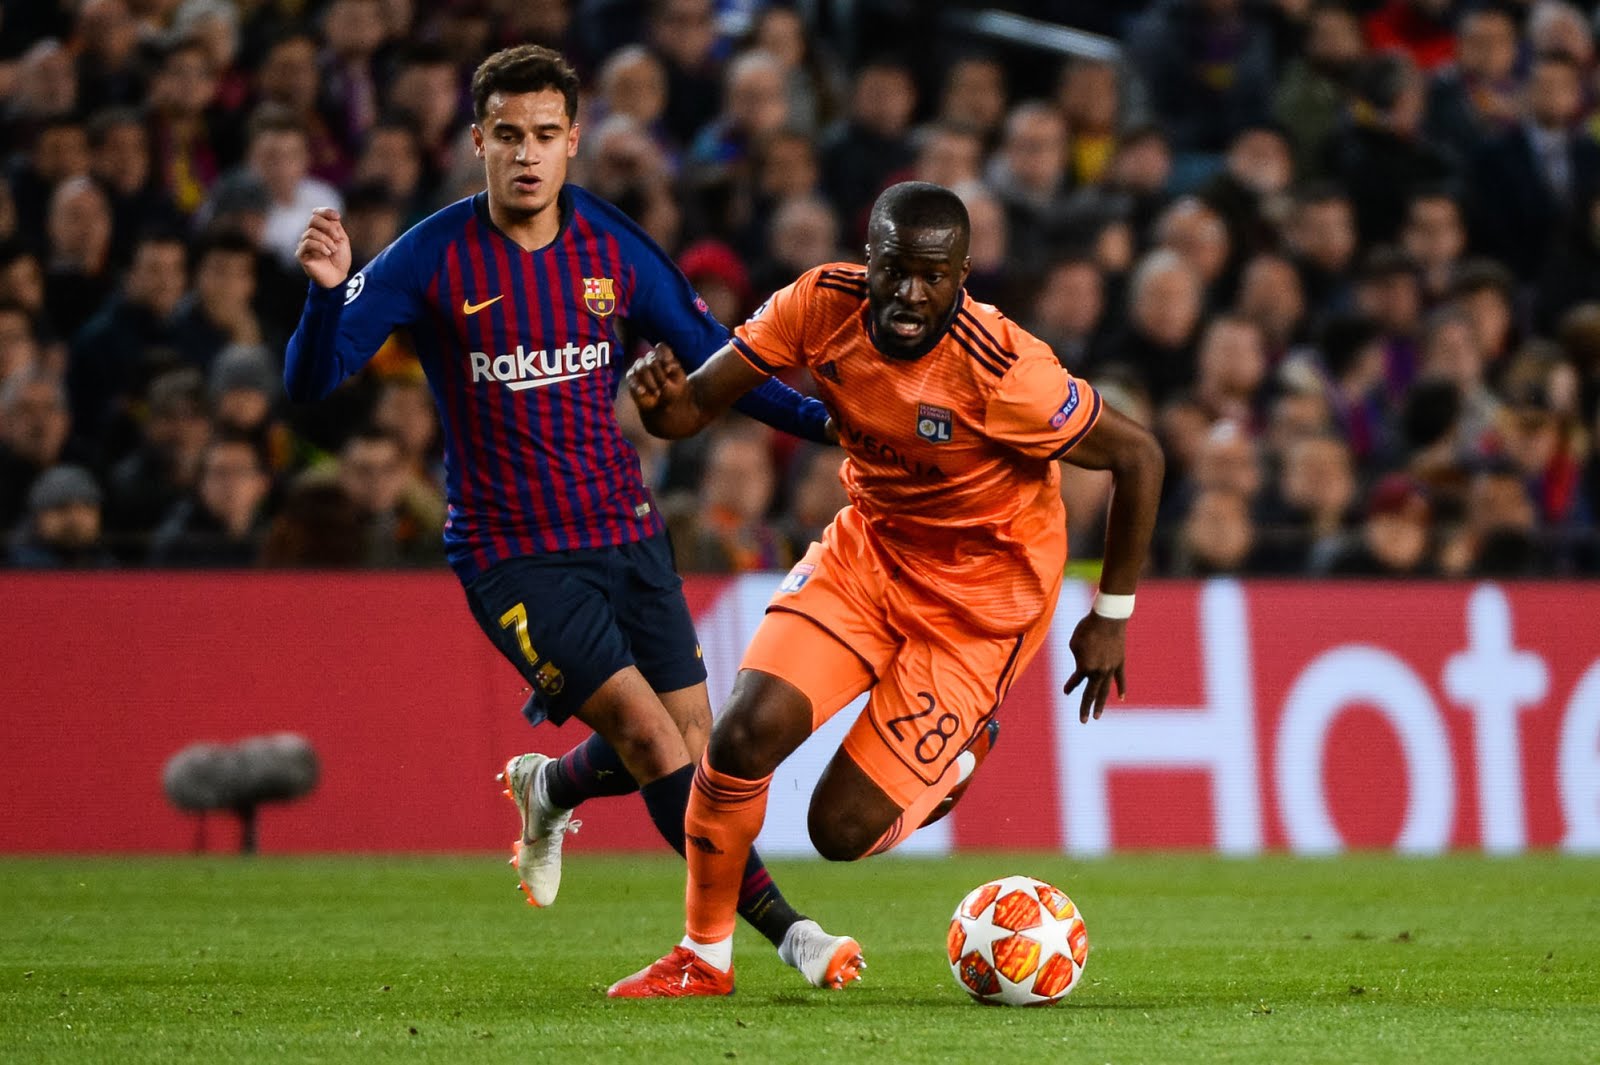 Philippe Coutinho of Barcelona and Tanguy Ndombele of Lyon during the UEFA Champions League Round of 16 Second Leg match between Barcelona and Lyon at Camp Nou on March 13, 2019 in Barcelona, Spain